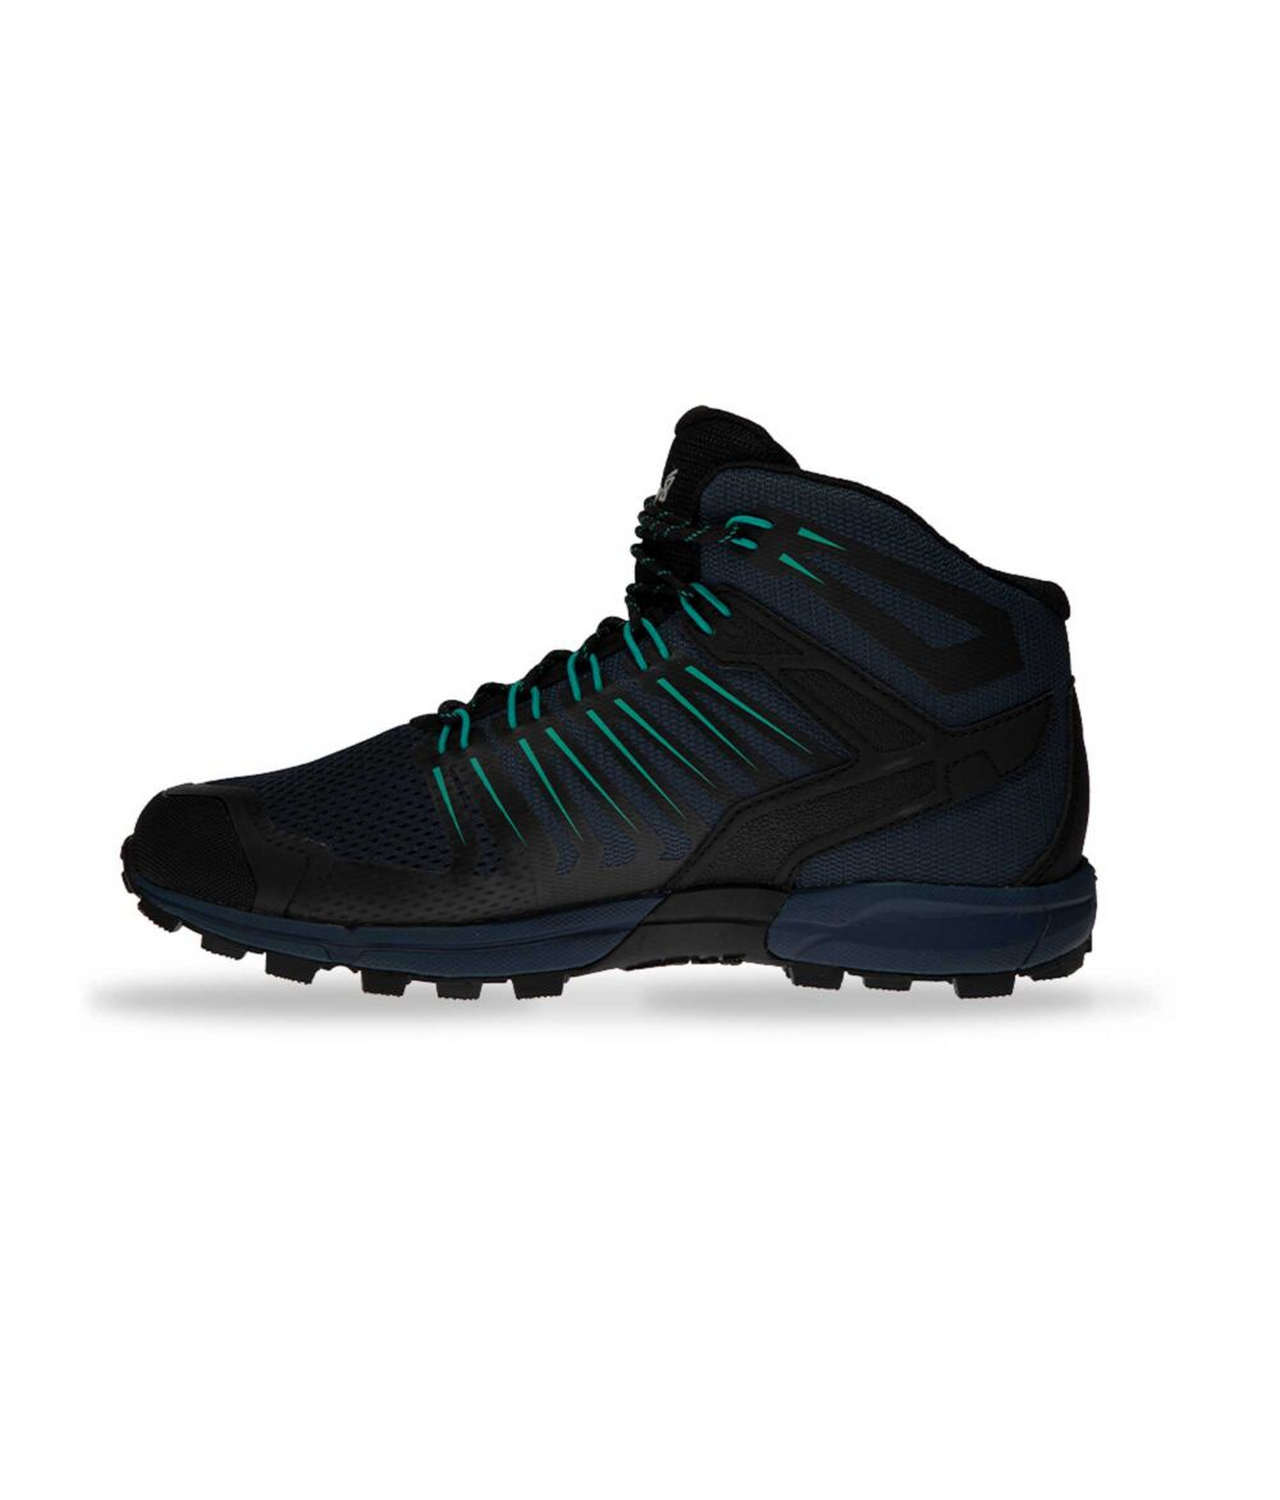 inov 8 roclite g 345 gtx w navy teal hike mid boot fast and light 3